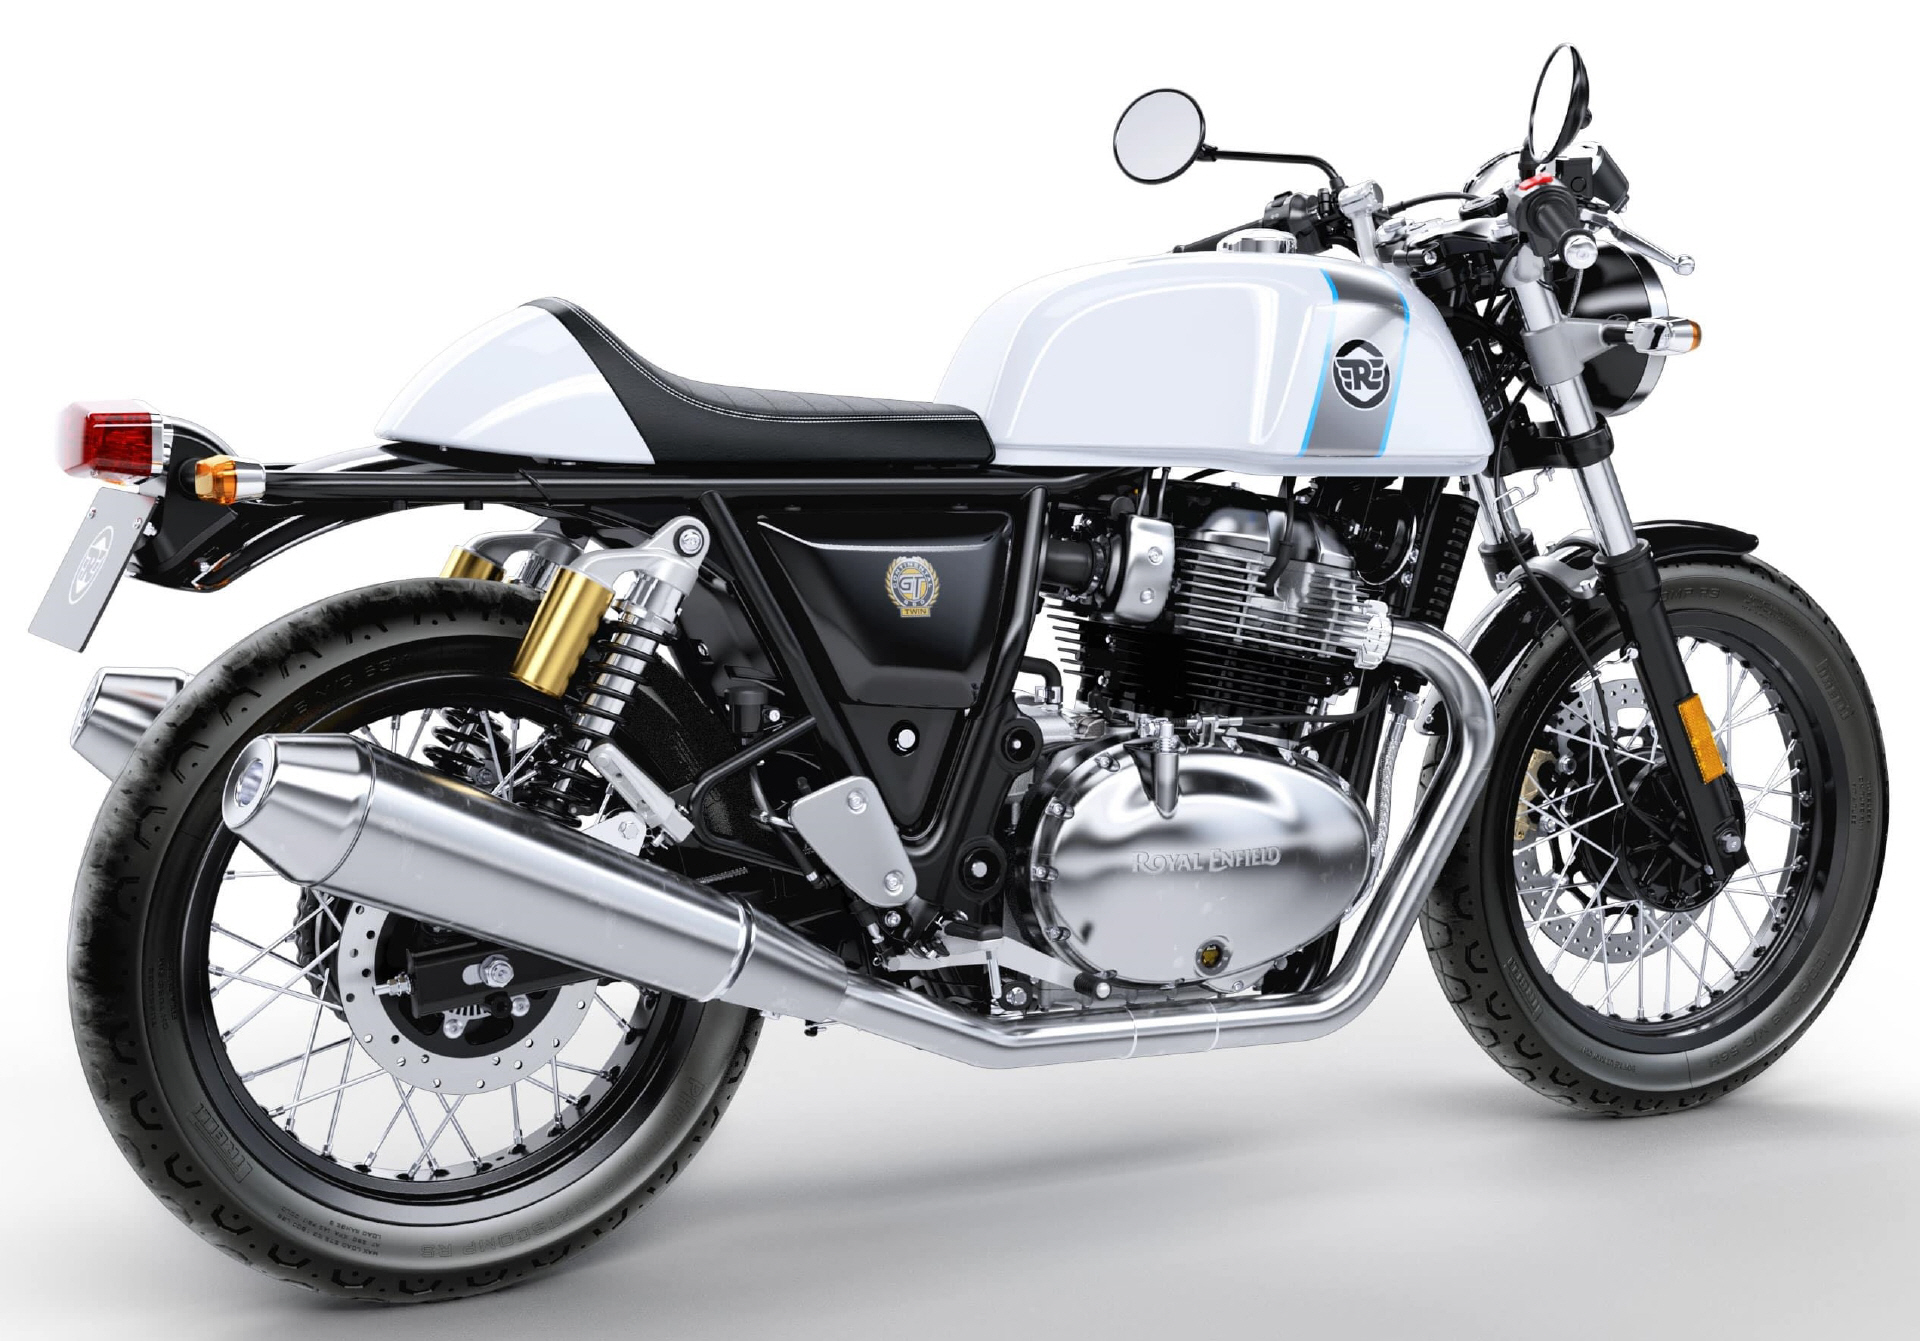 royalenfield_continentalgt_twin_02jpg